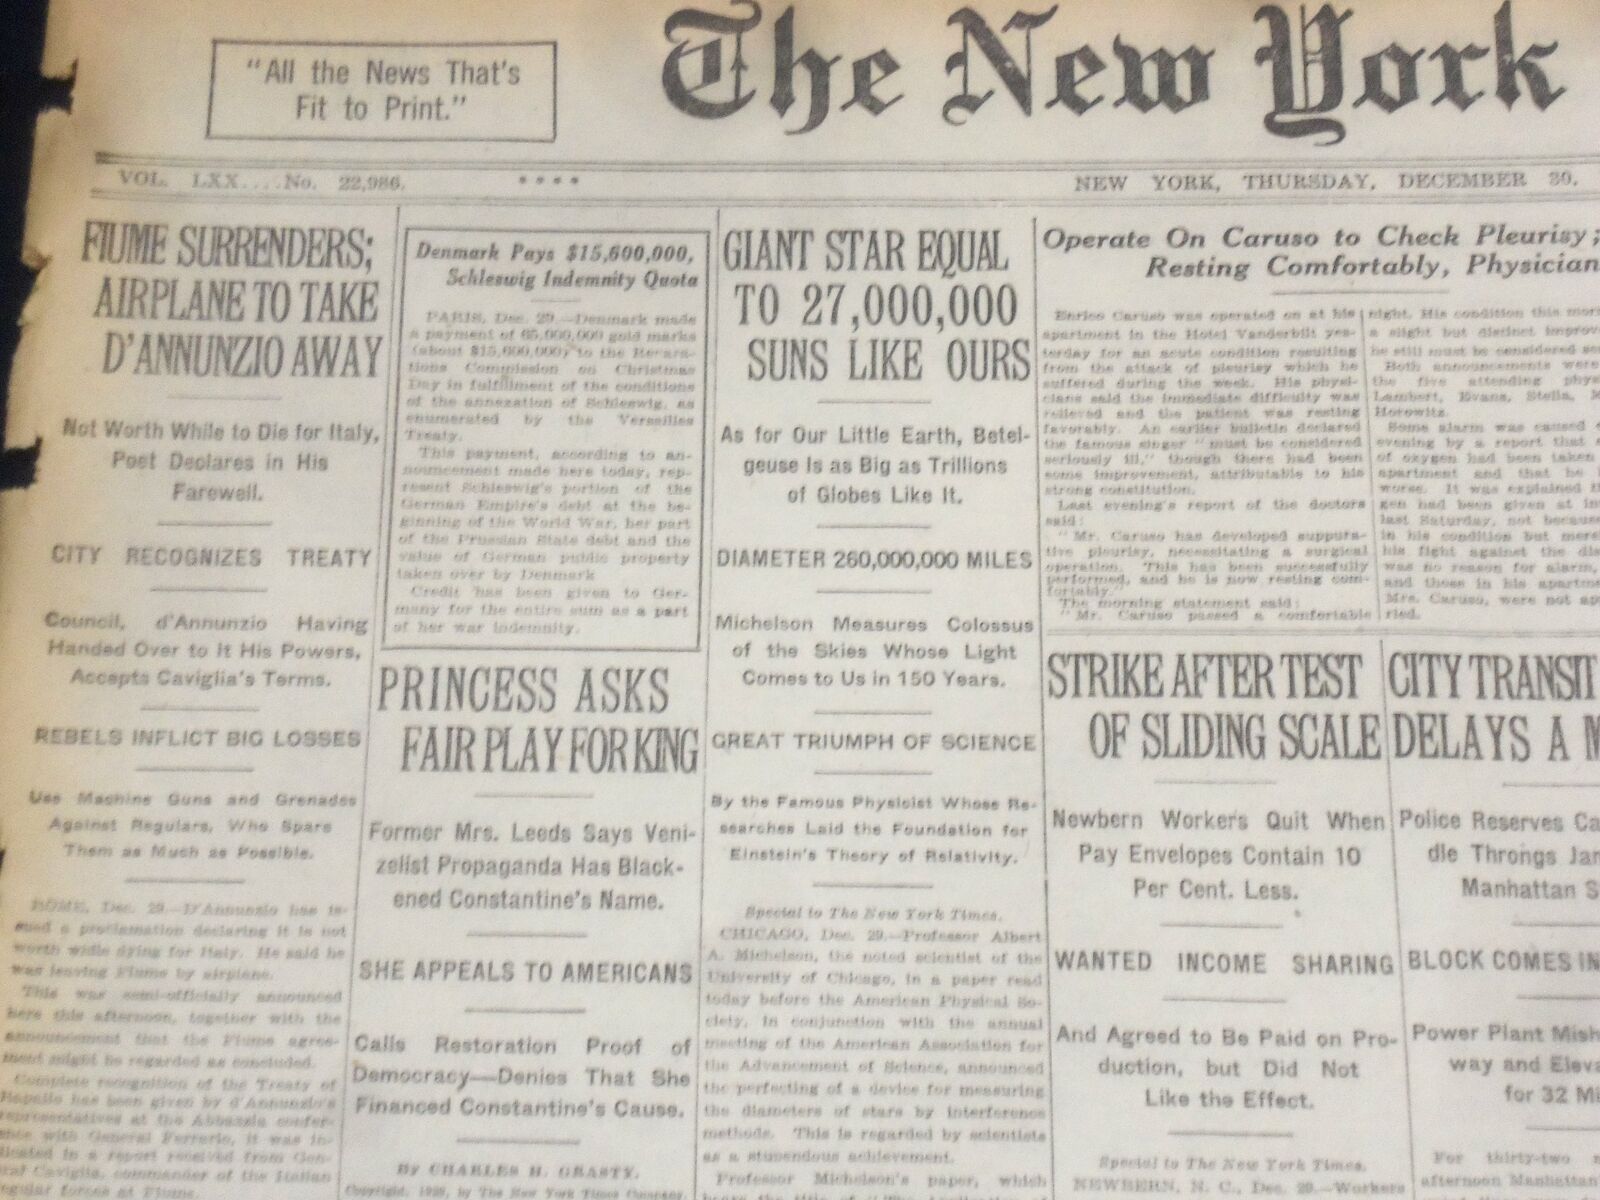 1920 DECEMBER 30 NEW YORK TIMES - GIANT STAR EQUAL TO 27,000,000 SUNS - NT 8488